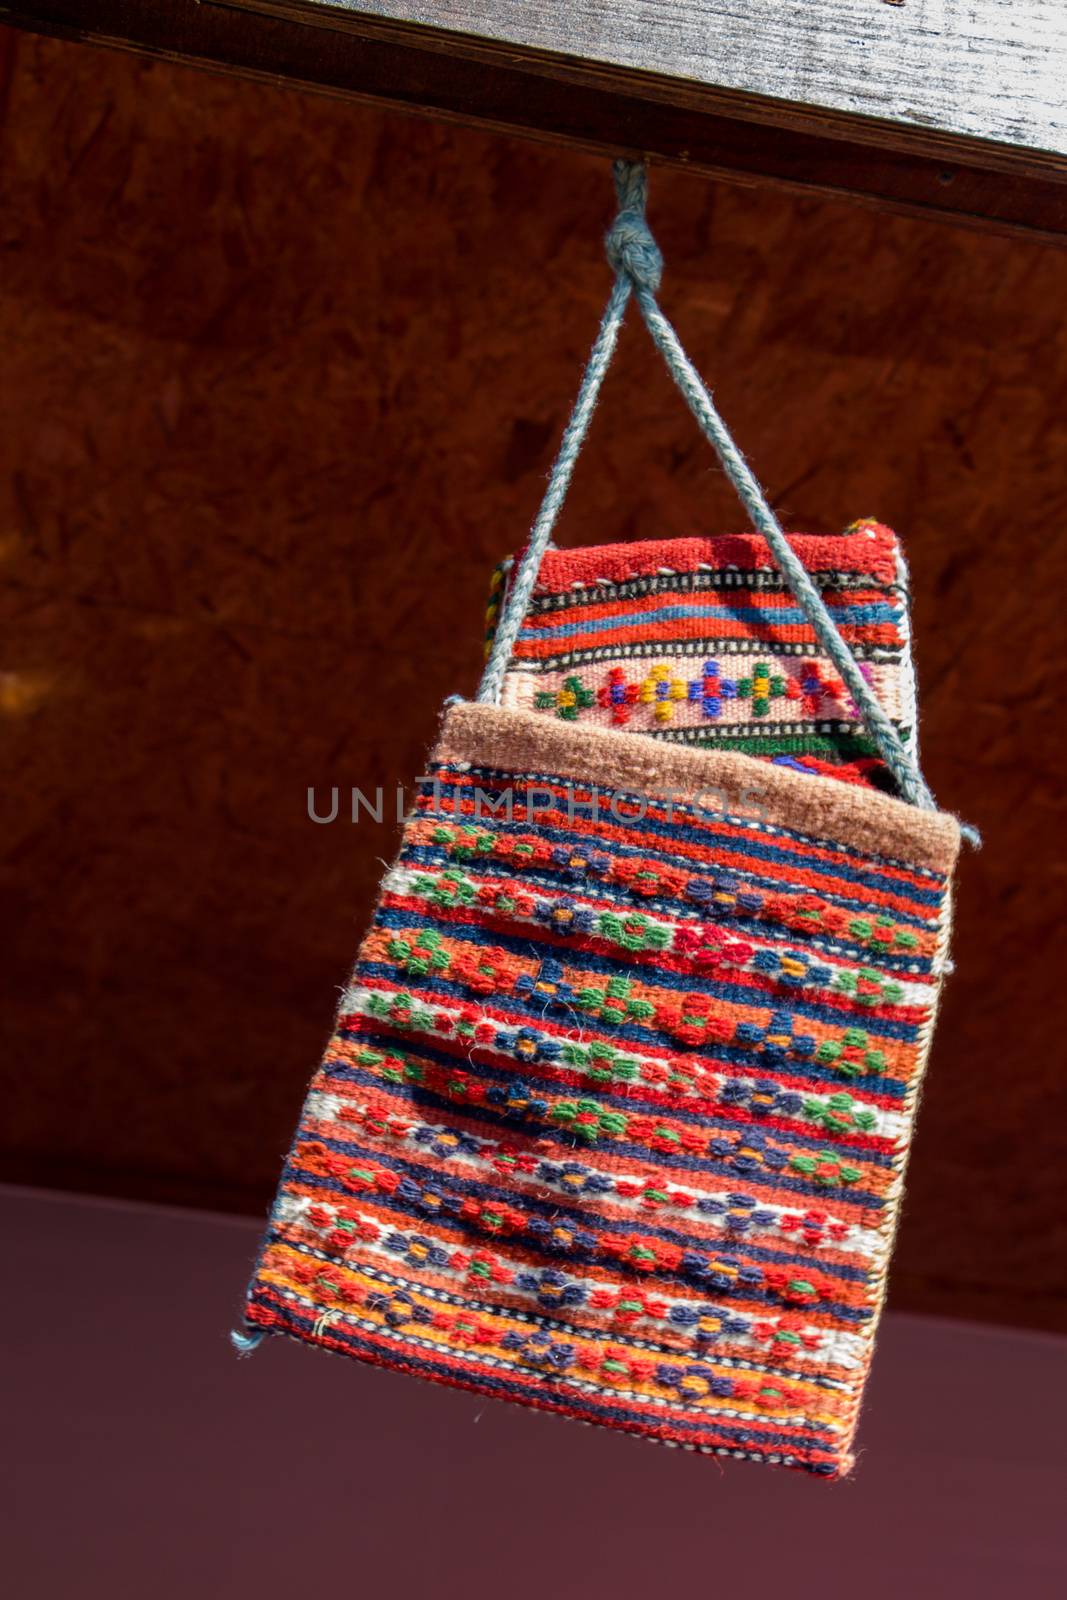 Traditional style handmade woven bags made of fabric